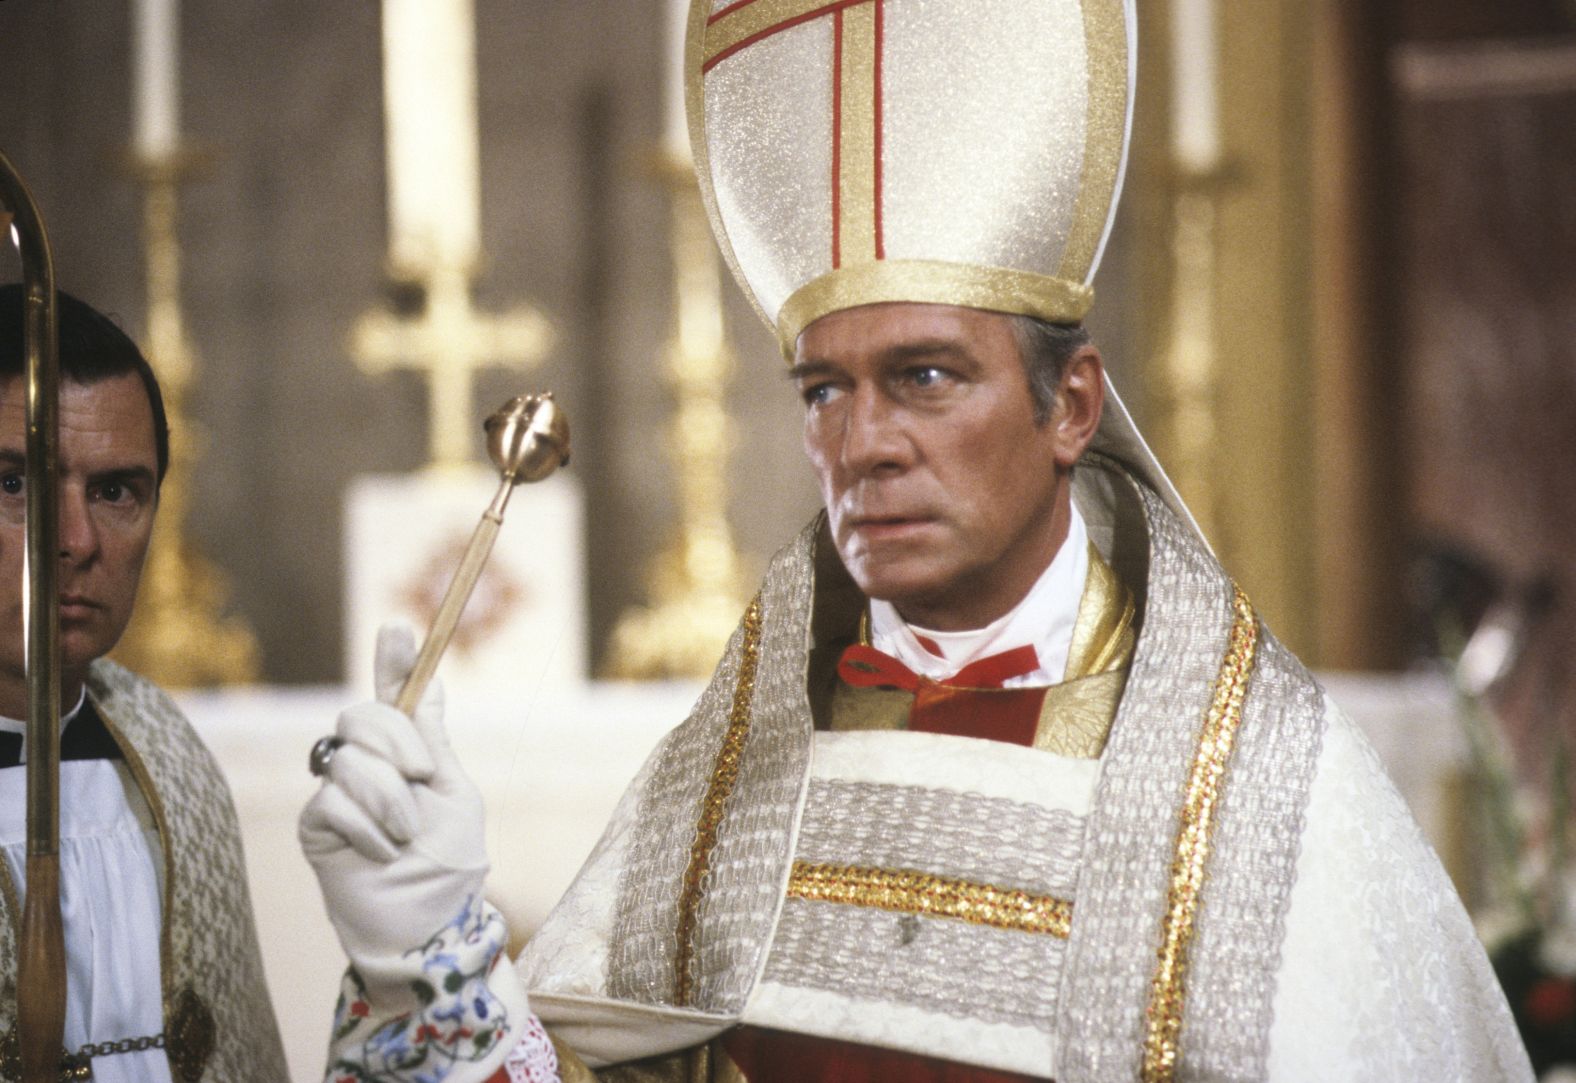 Plummer plays an archbishop in the 1983 miniseries "The Thorn Birds."